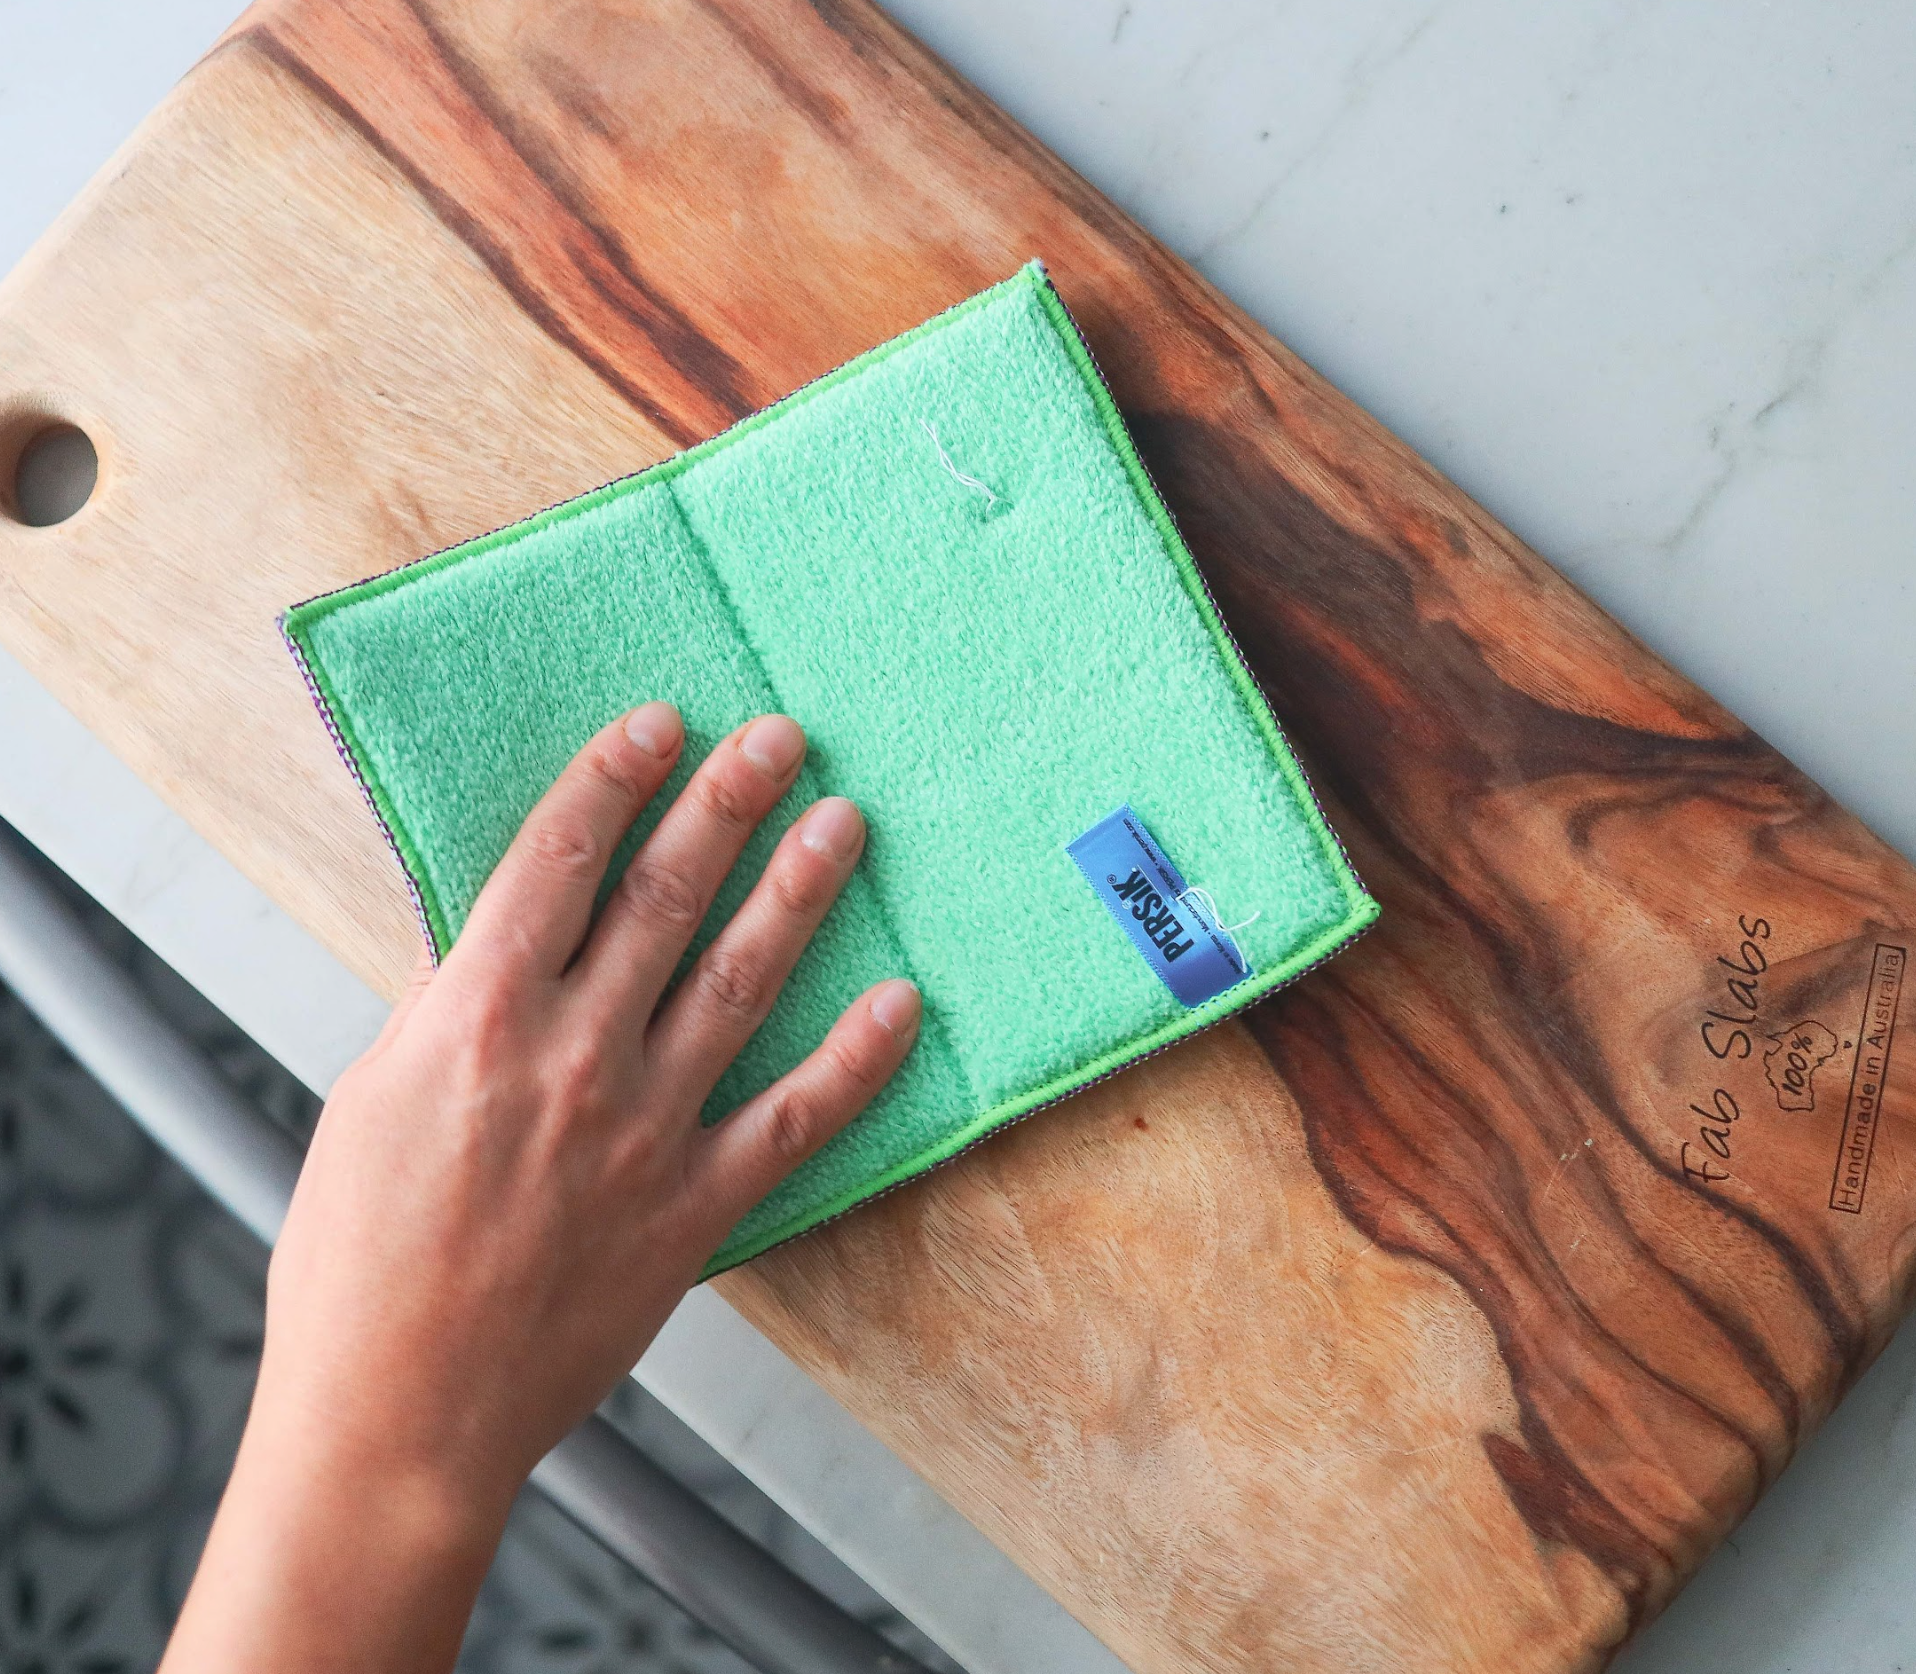 Fab Slabs Antibacterial Cutting Boards: The World's Most Hygienic Boards